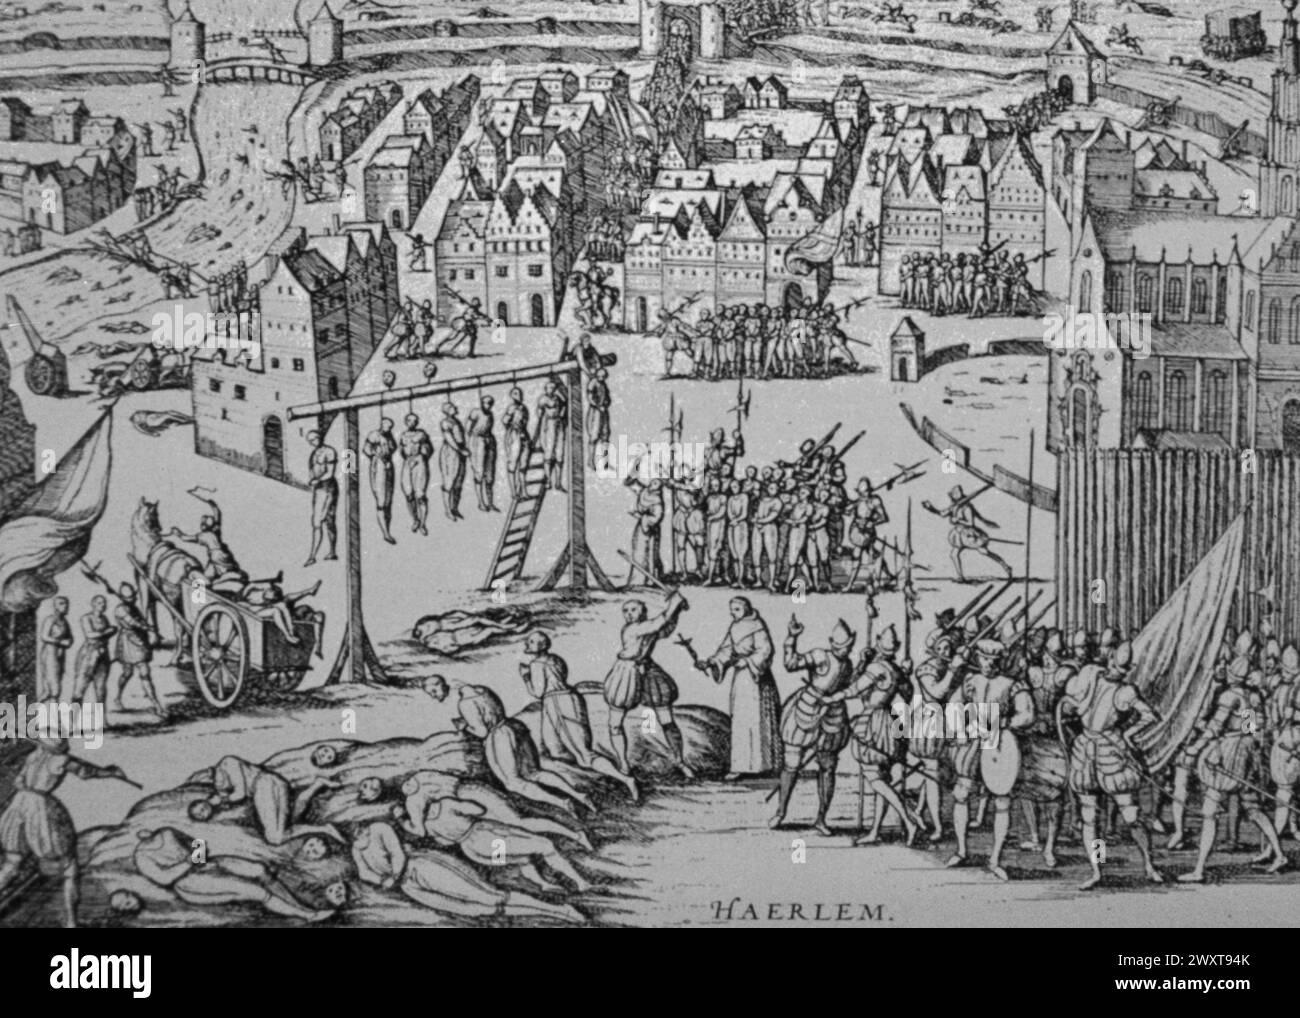 The Spanish execute Protestants in Haarlem, the Netherlands, engraving by Flemish artist Frans Hogenberg, 16th century Stock Photo